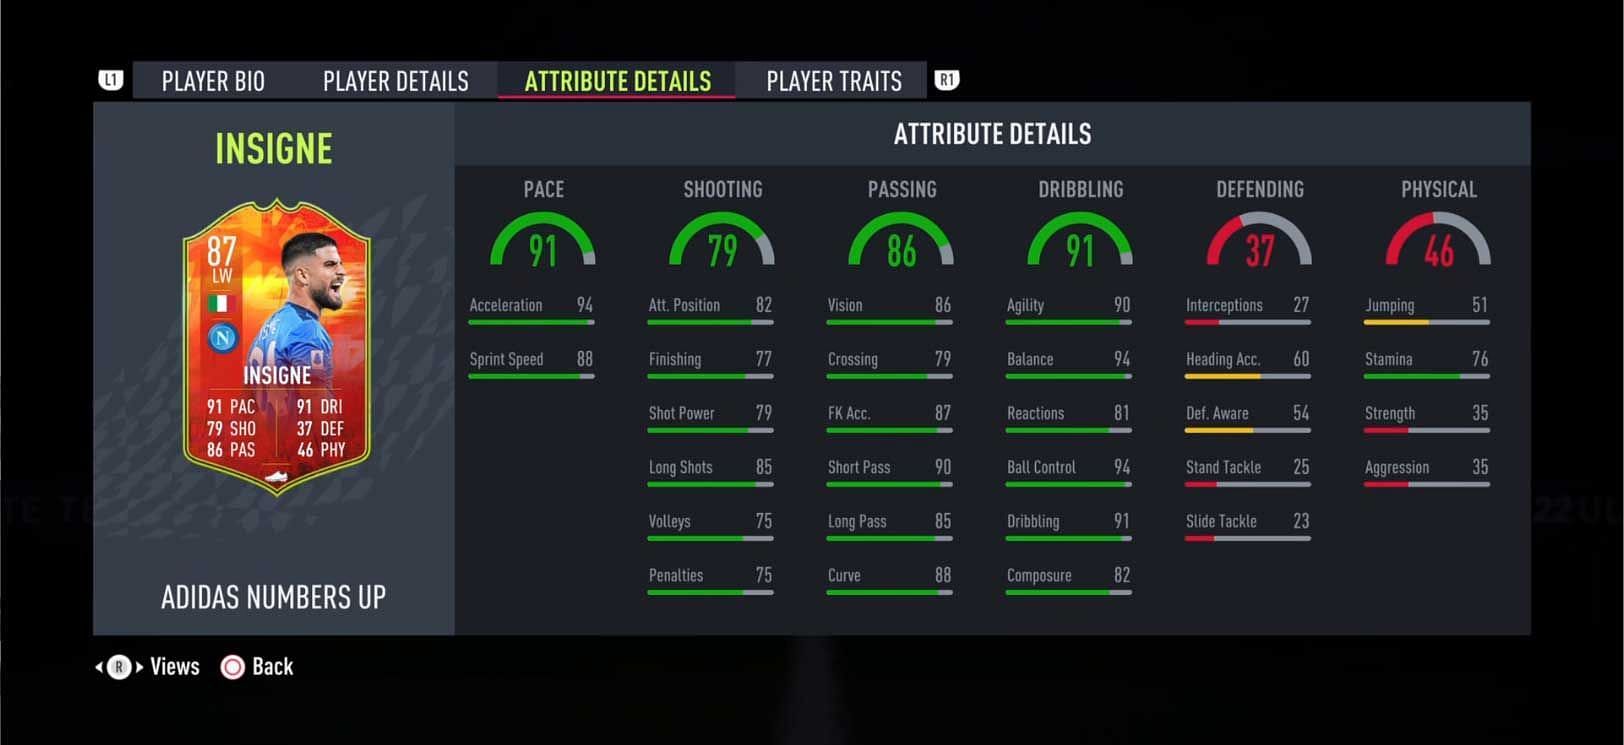 Insigne Numbers Up card stats in FIFA 22 (Image via FIFA 22)